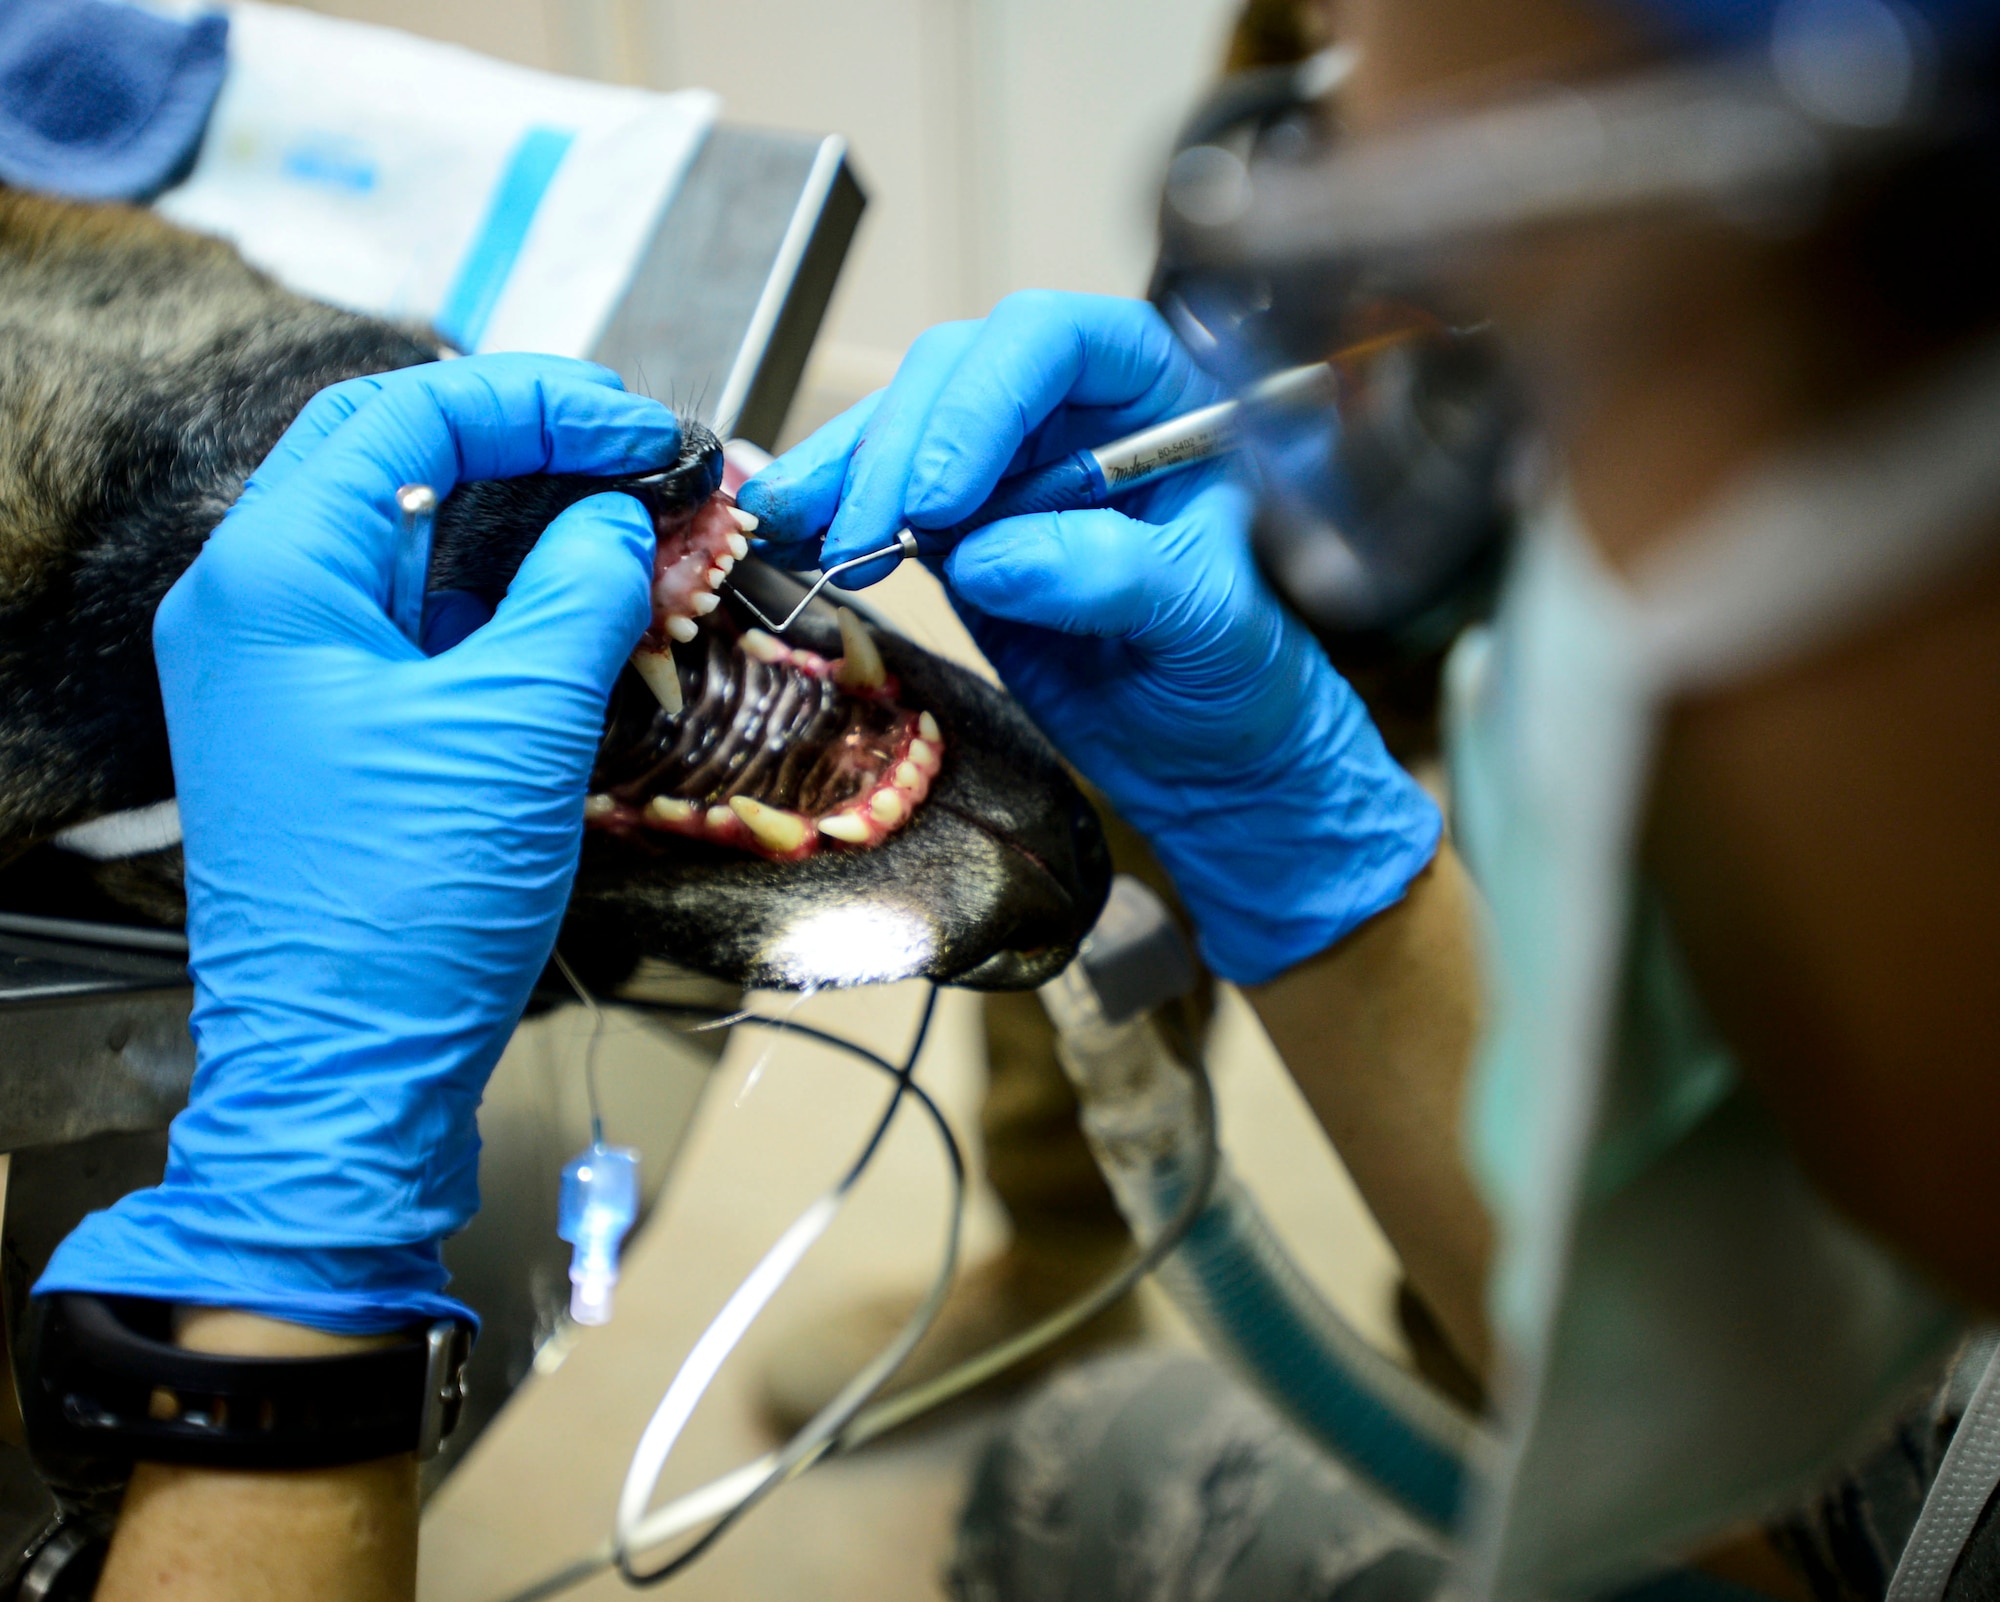 U.S. Air Force Capt. Marie Cross, 386th Expeditionary Medical Group general dentist, examines 332nd Expeditionary Security Forces Squadron Military Working Dog VVladimir’s teeth during a dental cleaning at an undisclosed location in Southwest Asia, Sept. 24, 2015. MWDs receive routine medical care to aid their human military partners during Operation Inherent Resolve. (U.S. Air Force photo by Senior Airman Racheal E. Watson/Released) 